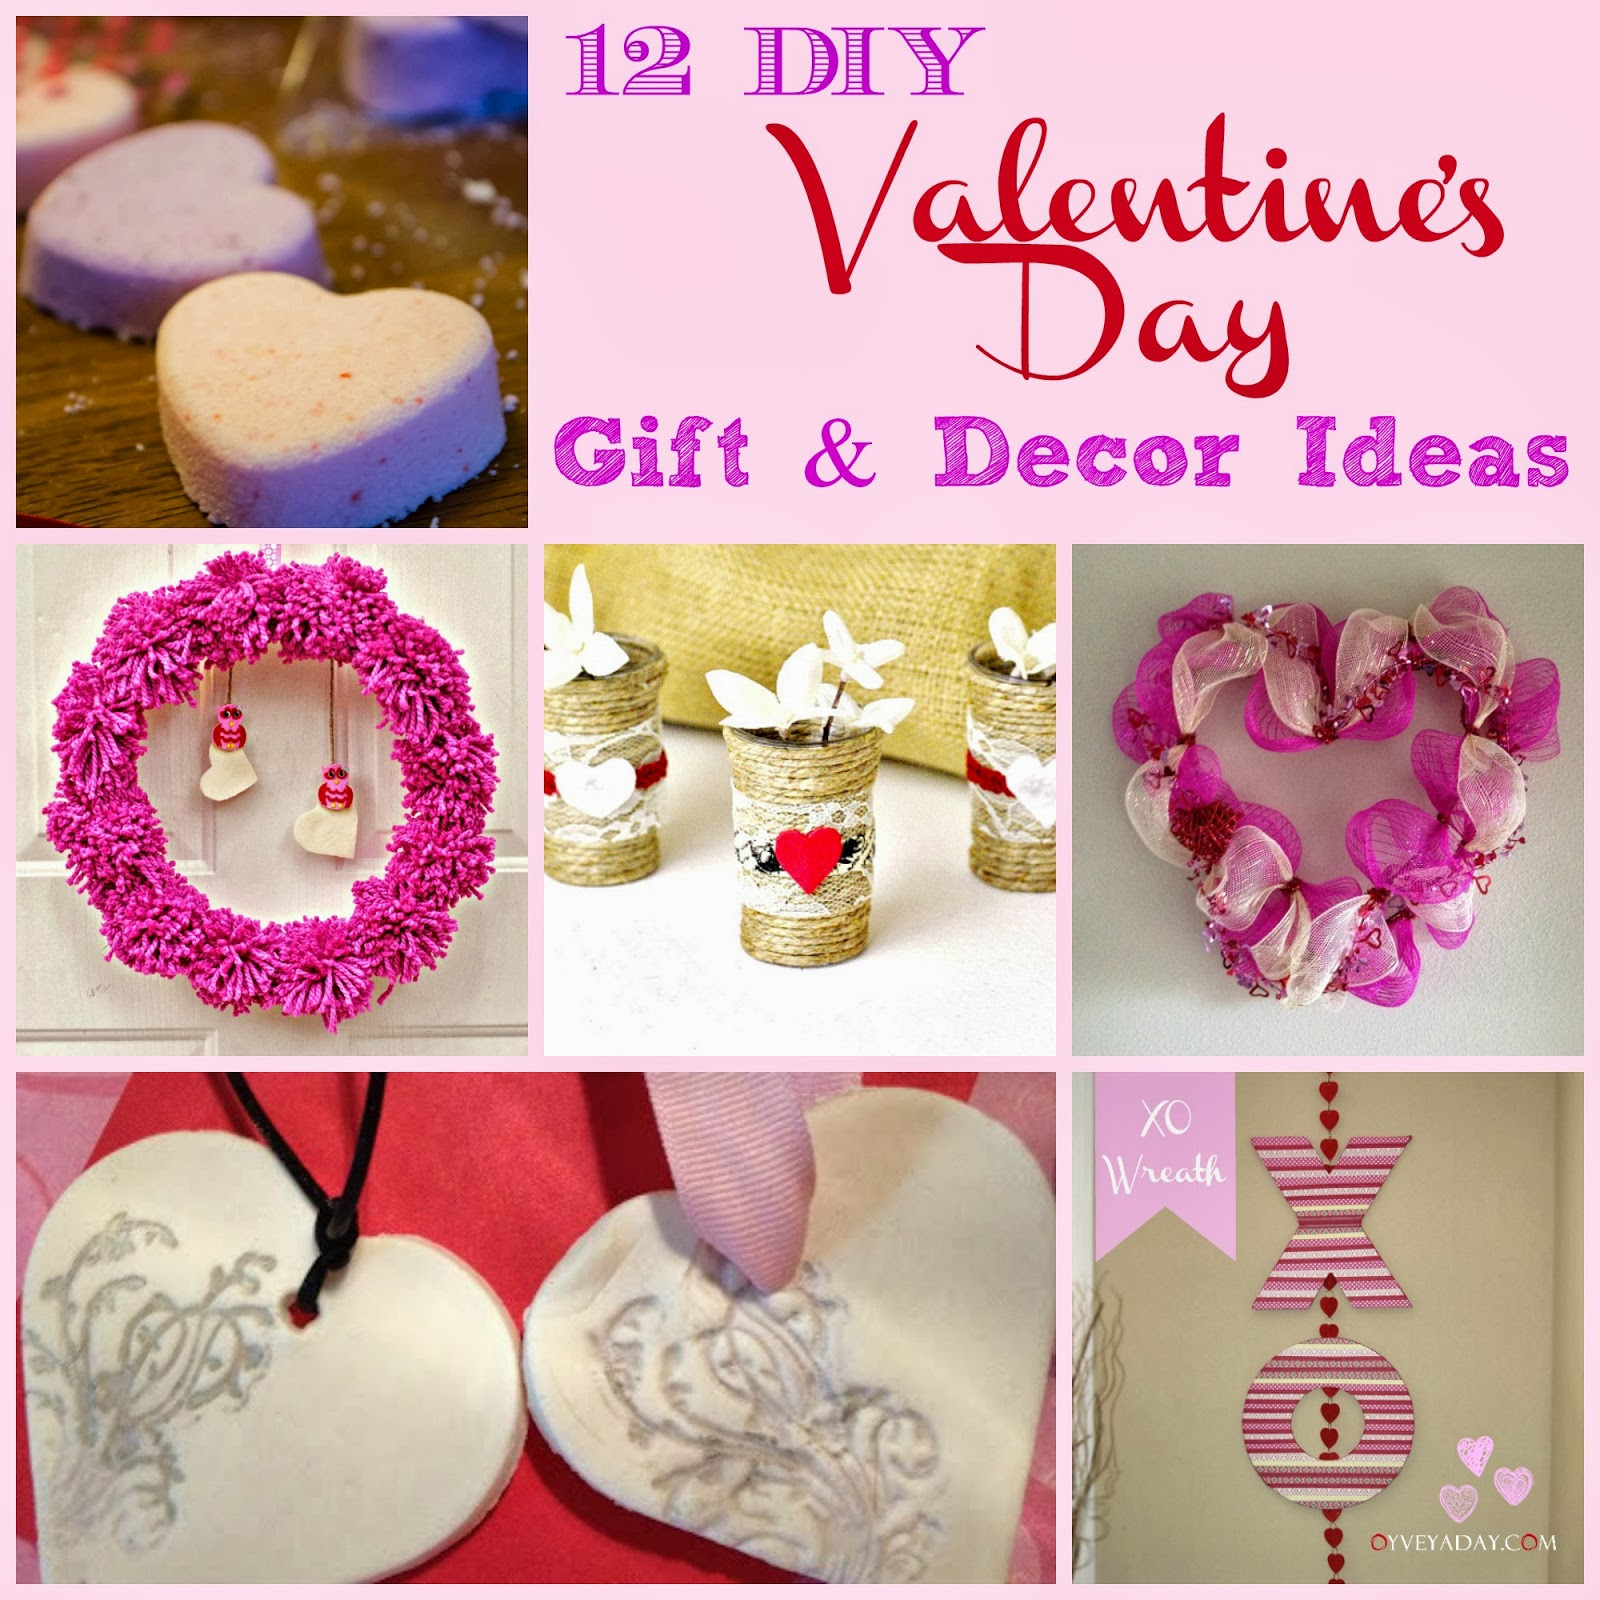 Valentine'S Day Craft Gift Ideas
 12 DIY Valentine s Day Gift & Decor Ideas Outnumbered 3 to 1